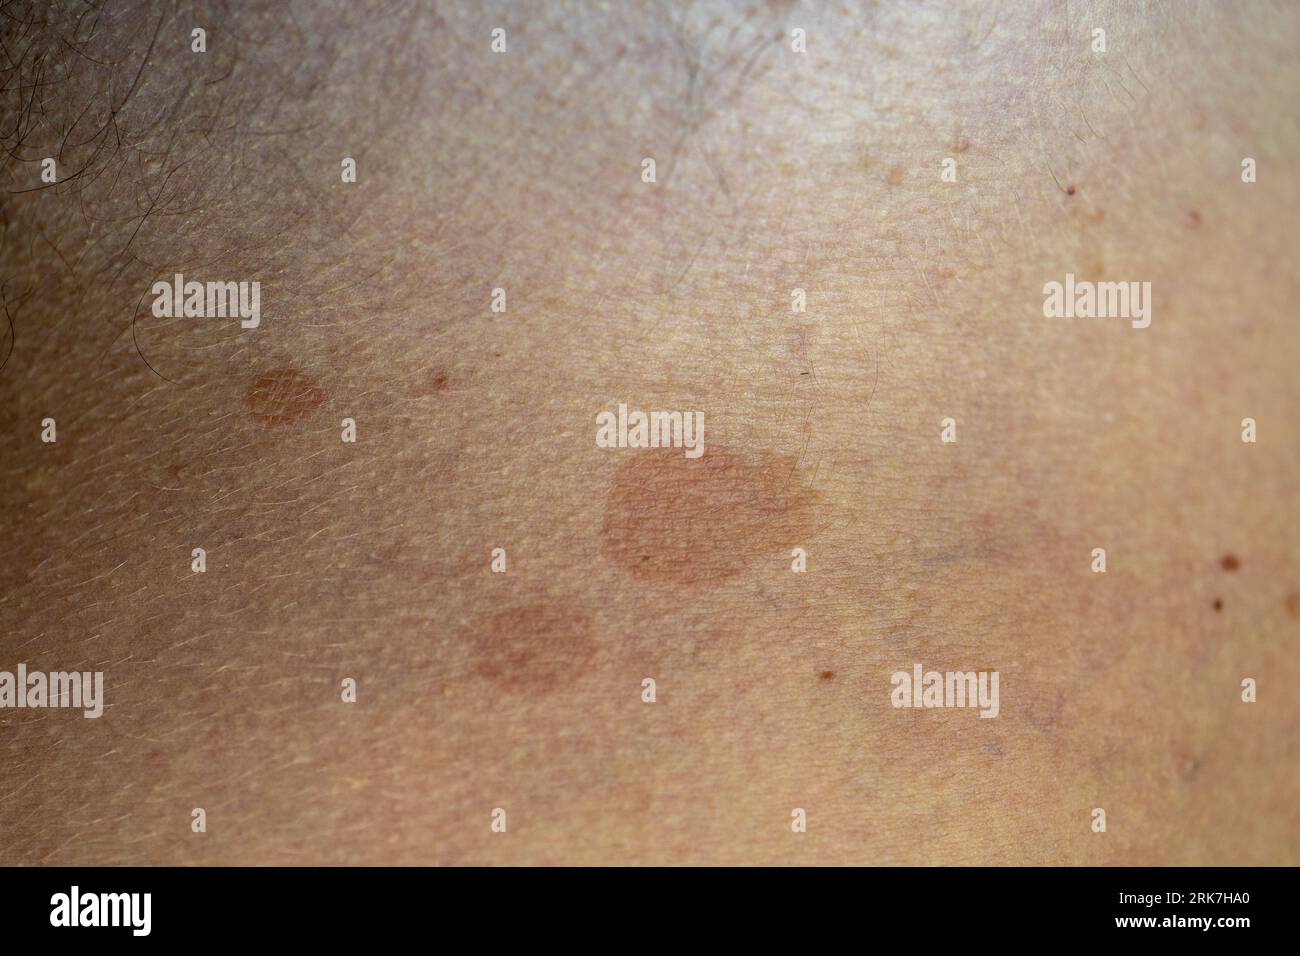 A man suffering from the skin condition Tinea Versicolor with